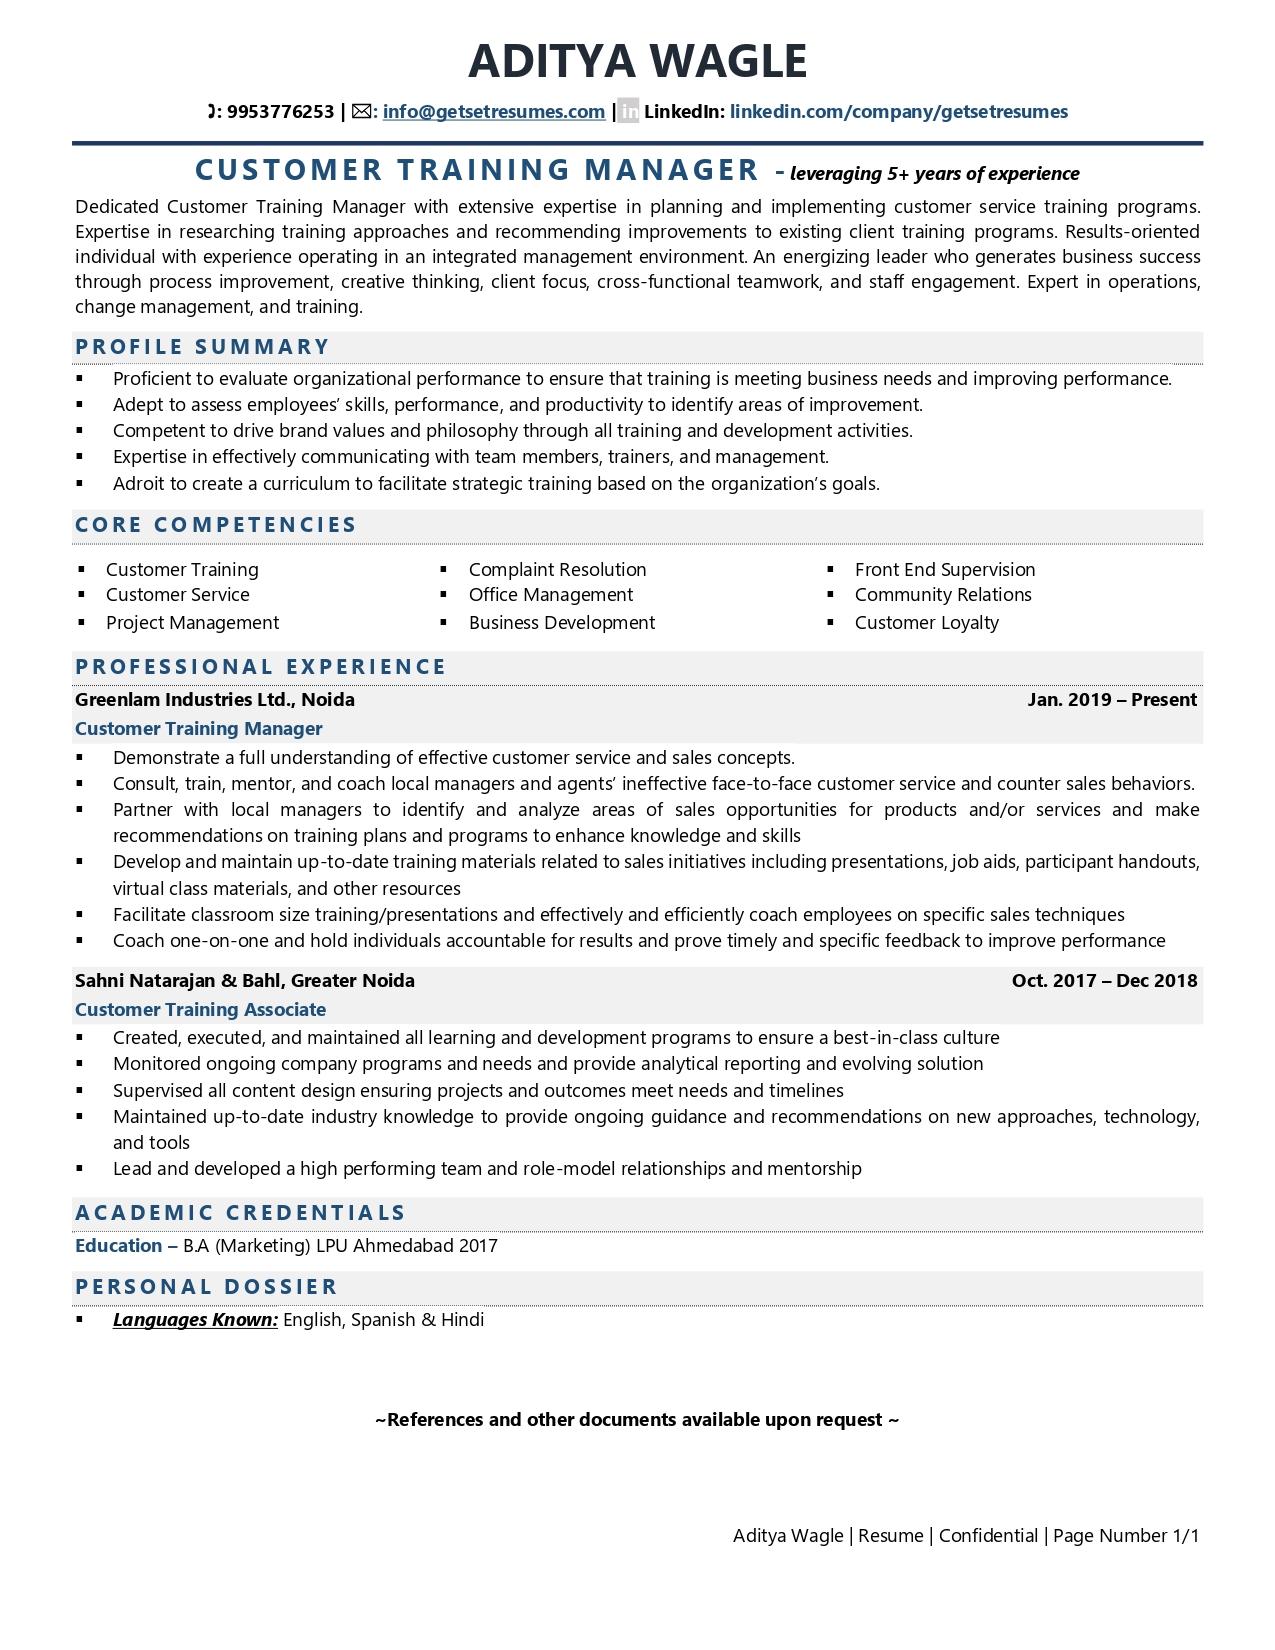 Customer Training Manager - Resume Example & Template